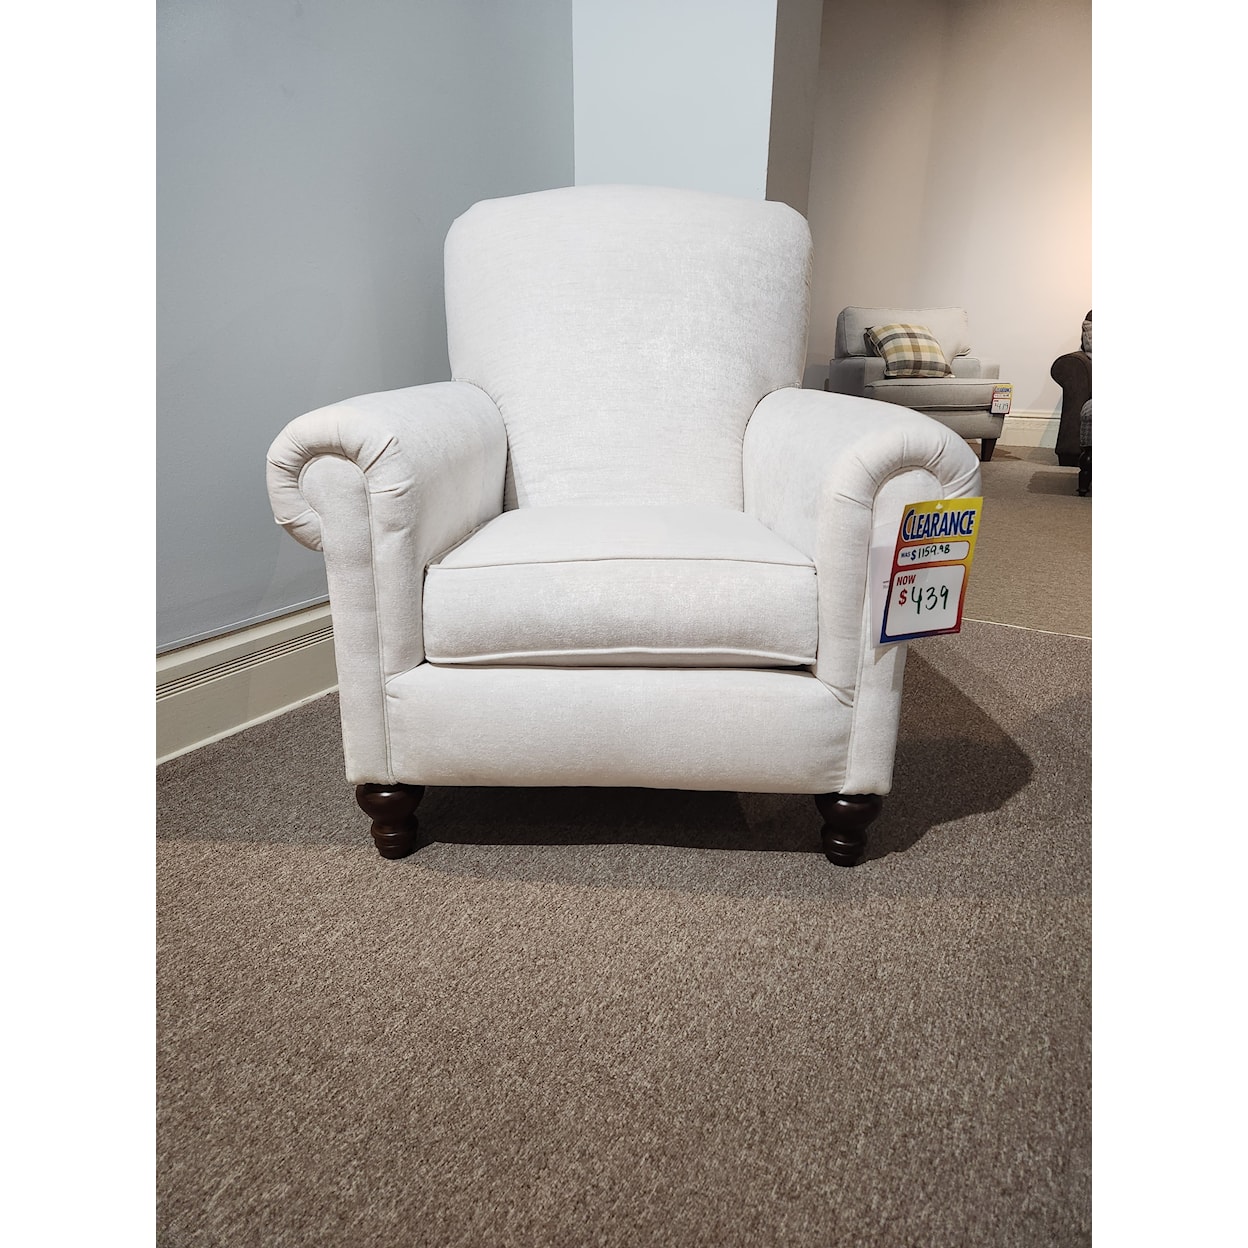 England 634 Upholstered Chairs